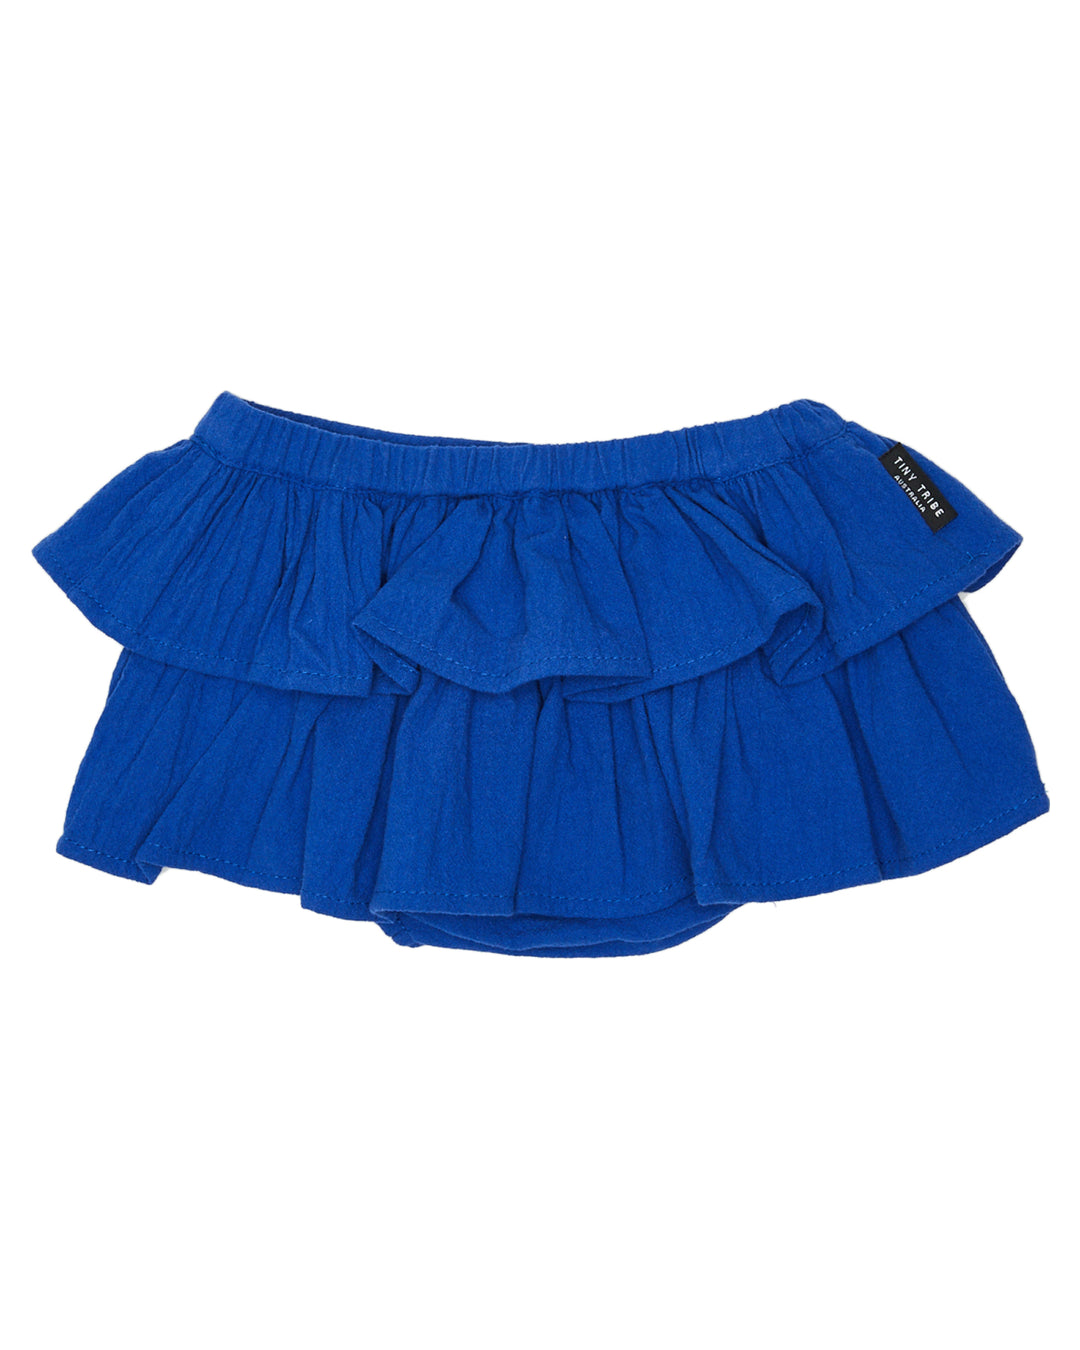 Blue Frill Skirt with Diaper Cover